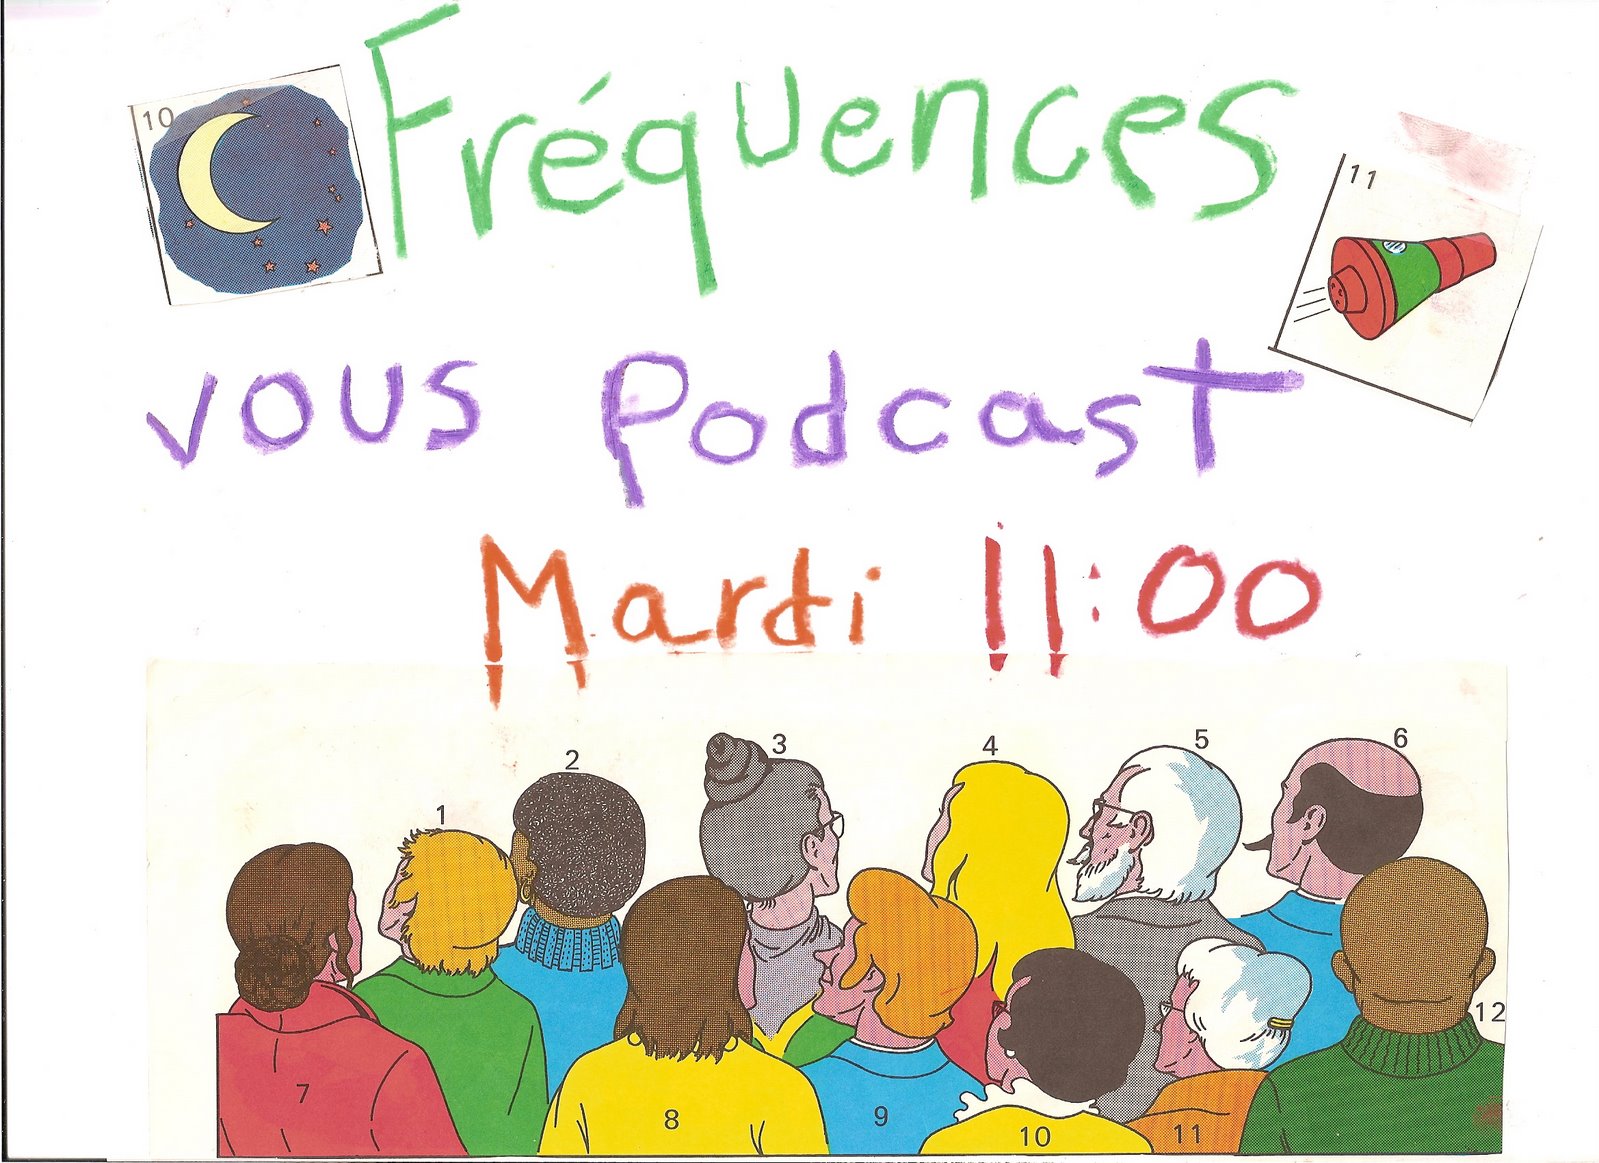 [banniere+podcast+frequences+1.jpg]